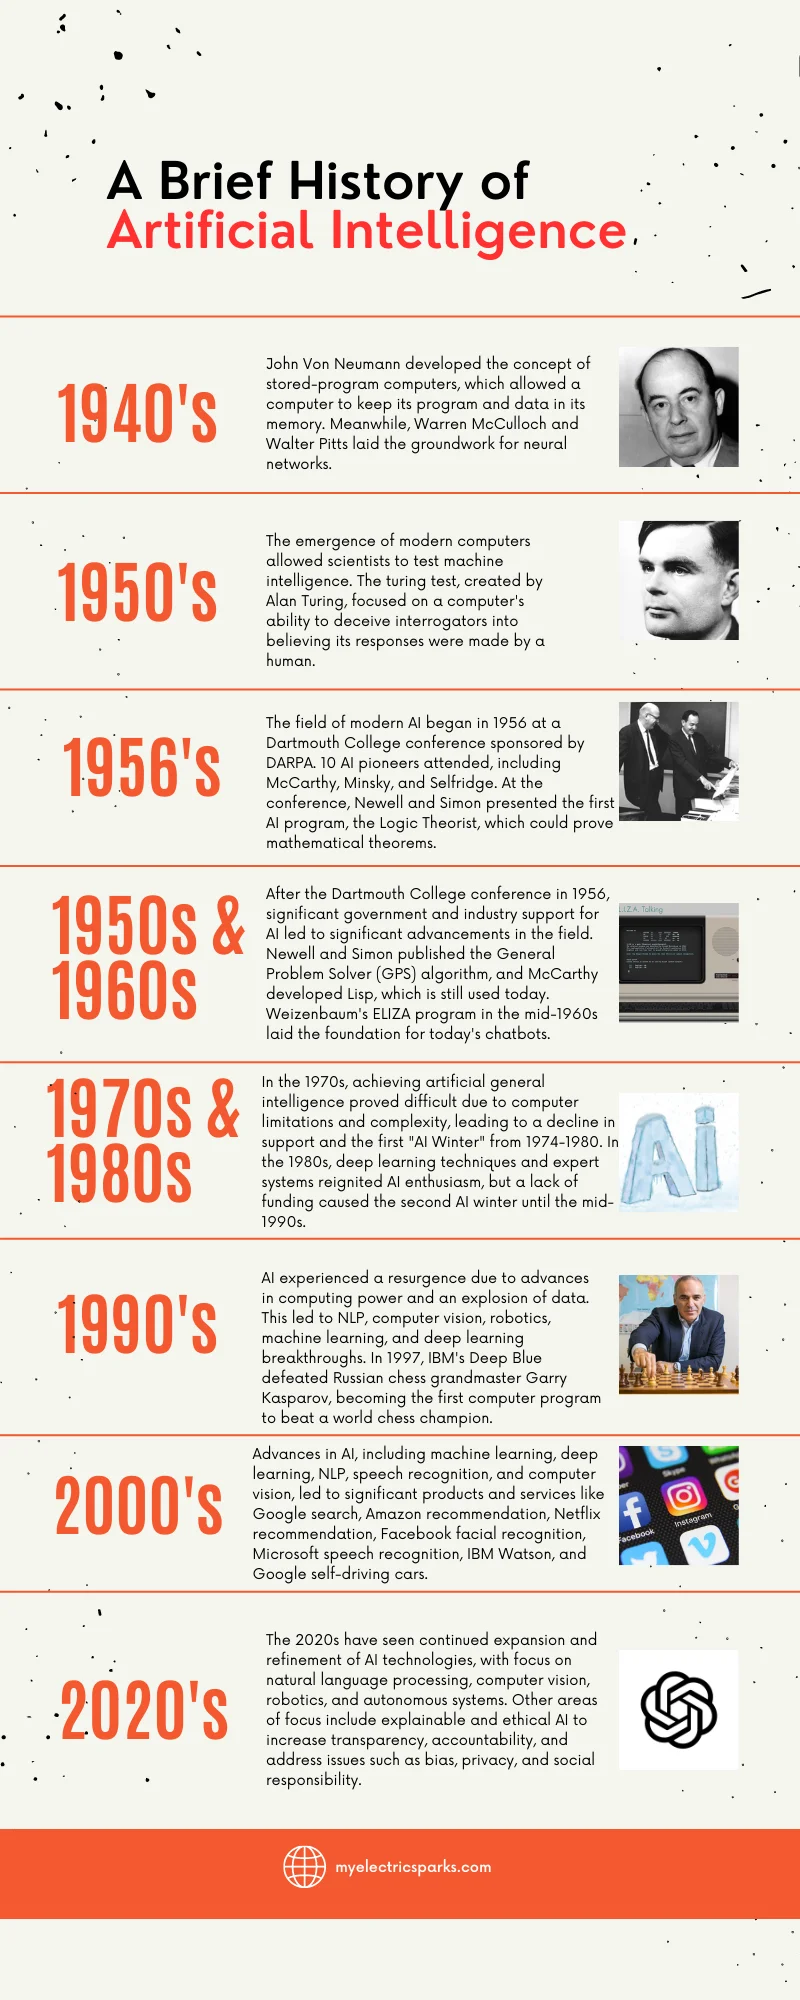 A timeline of the evolution of artificial intelligence from the 1940s to the 2020s.